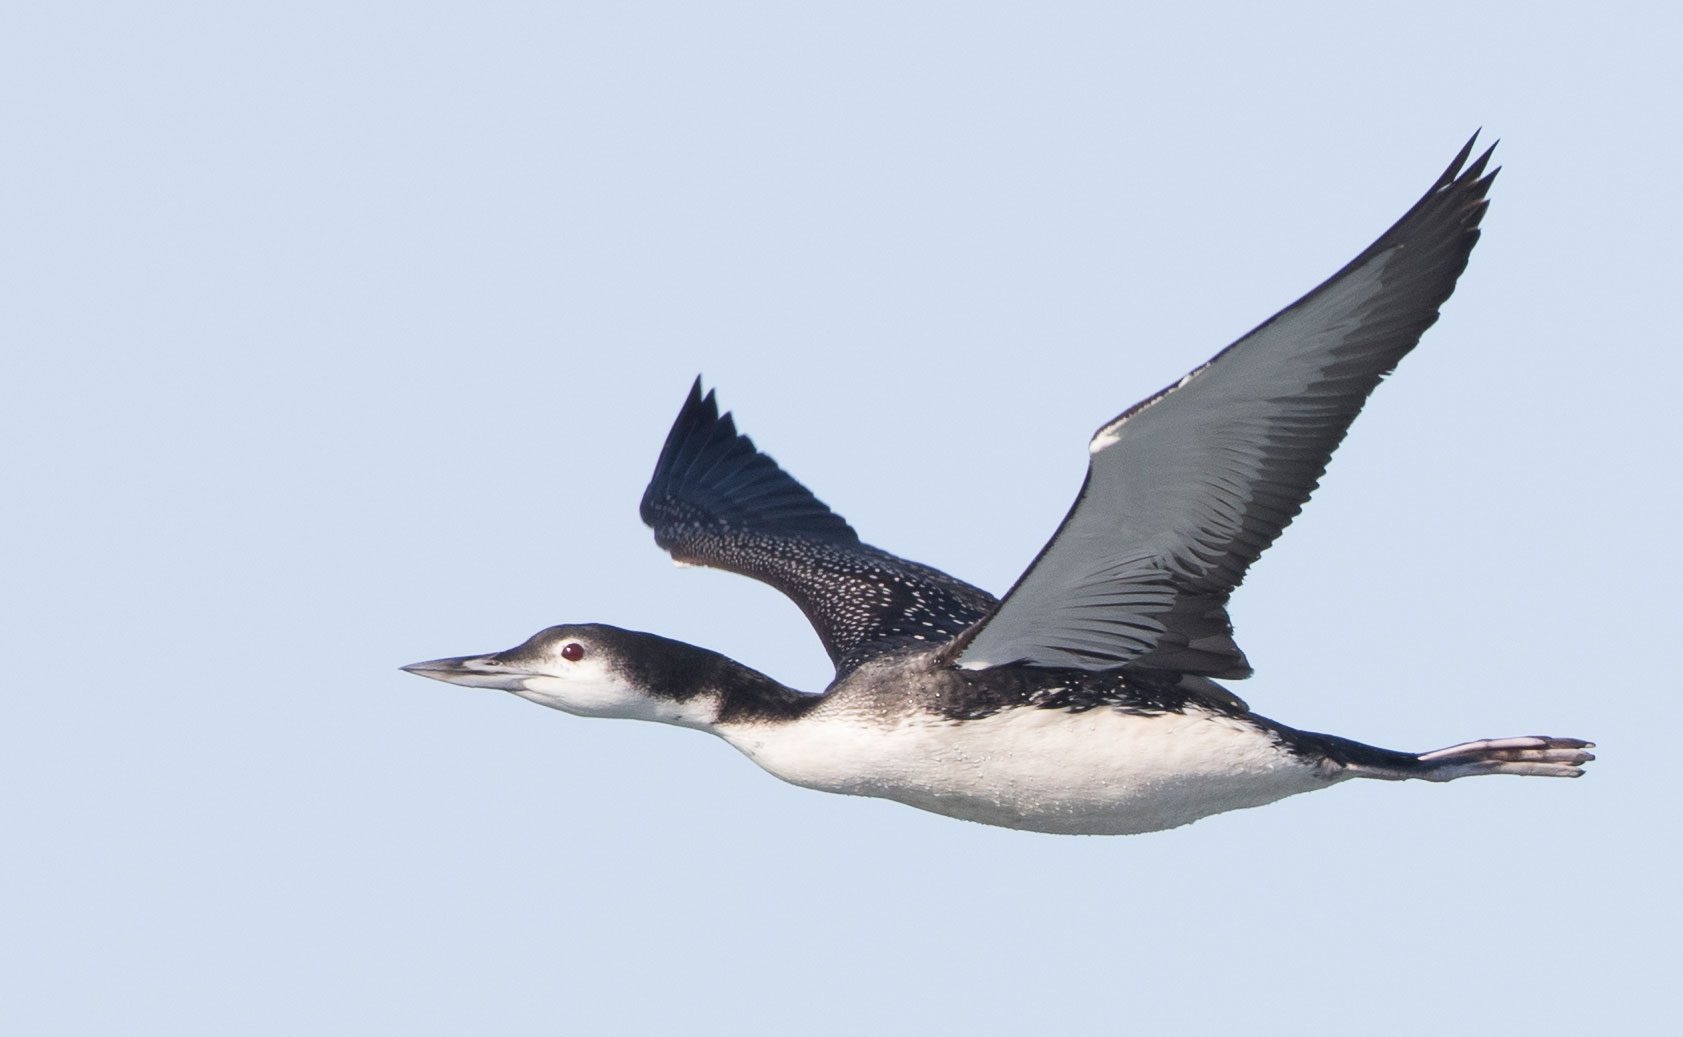 A Common Loon in nonbreeding plumage in flight